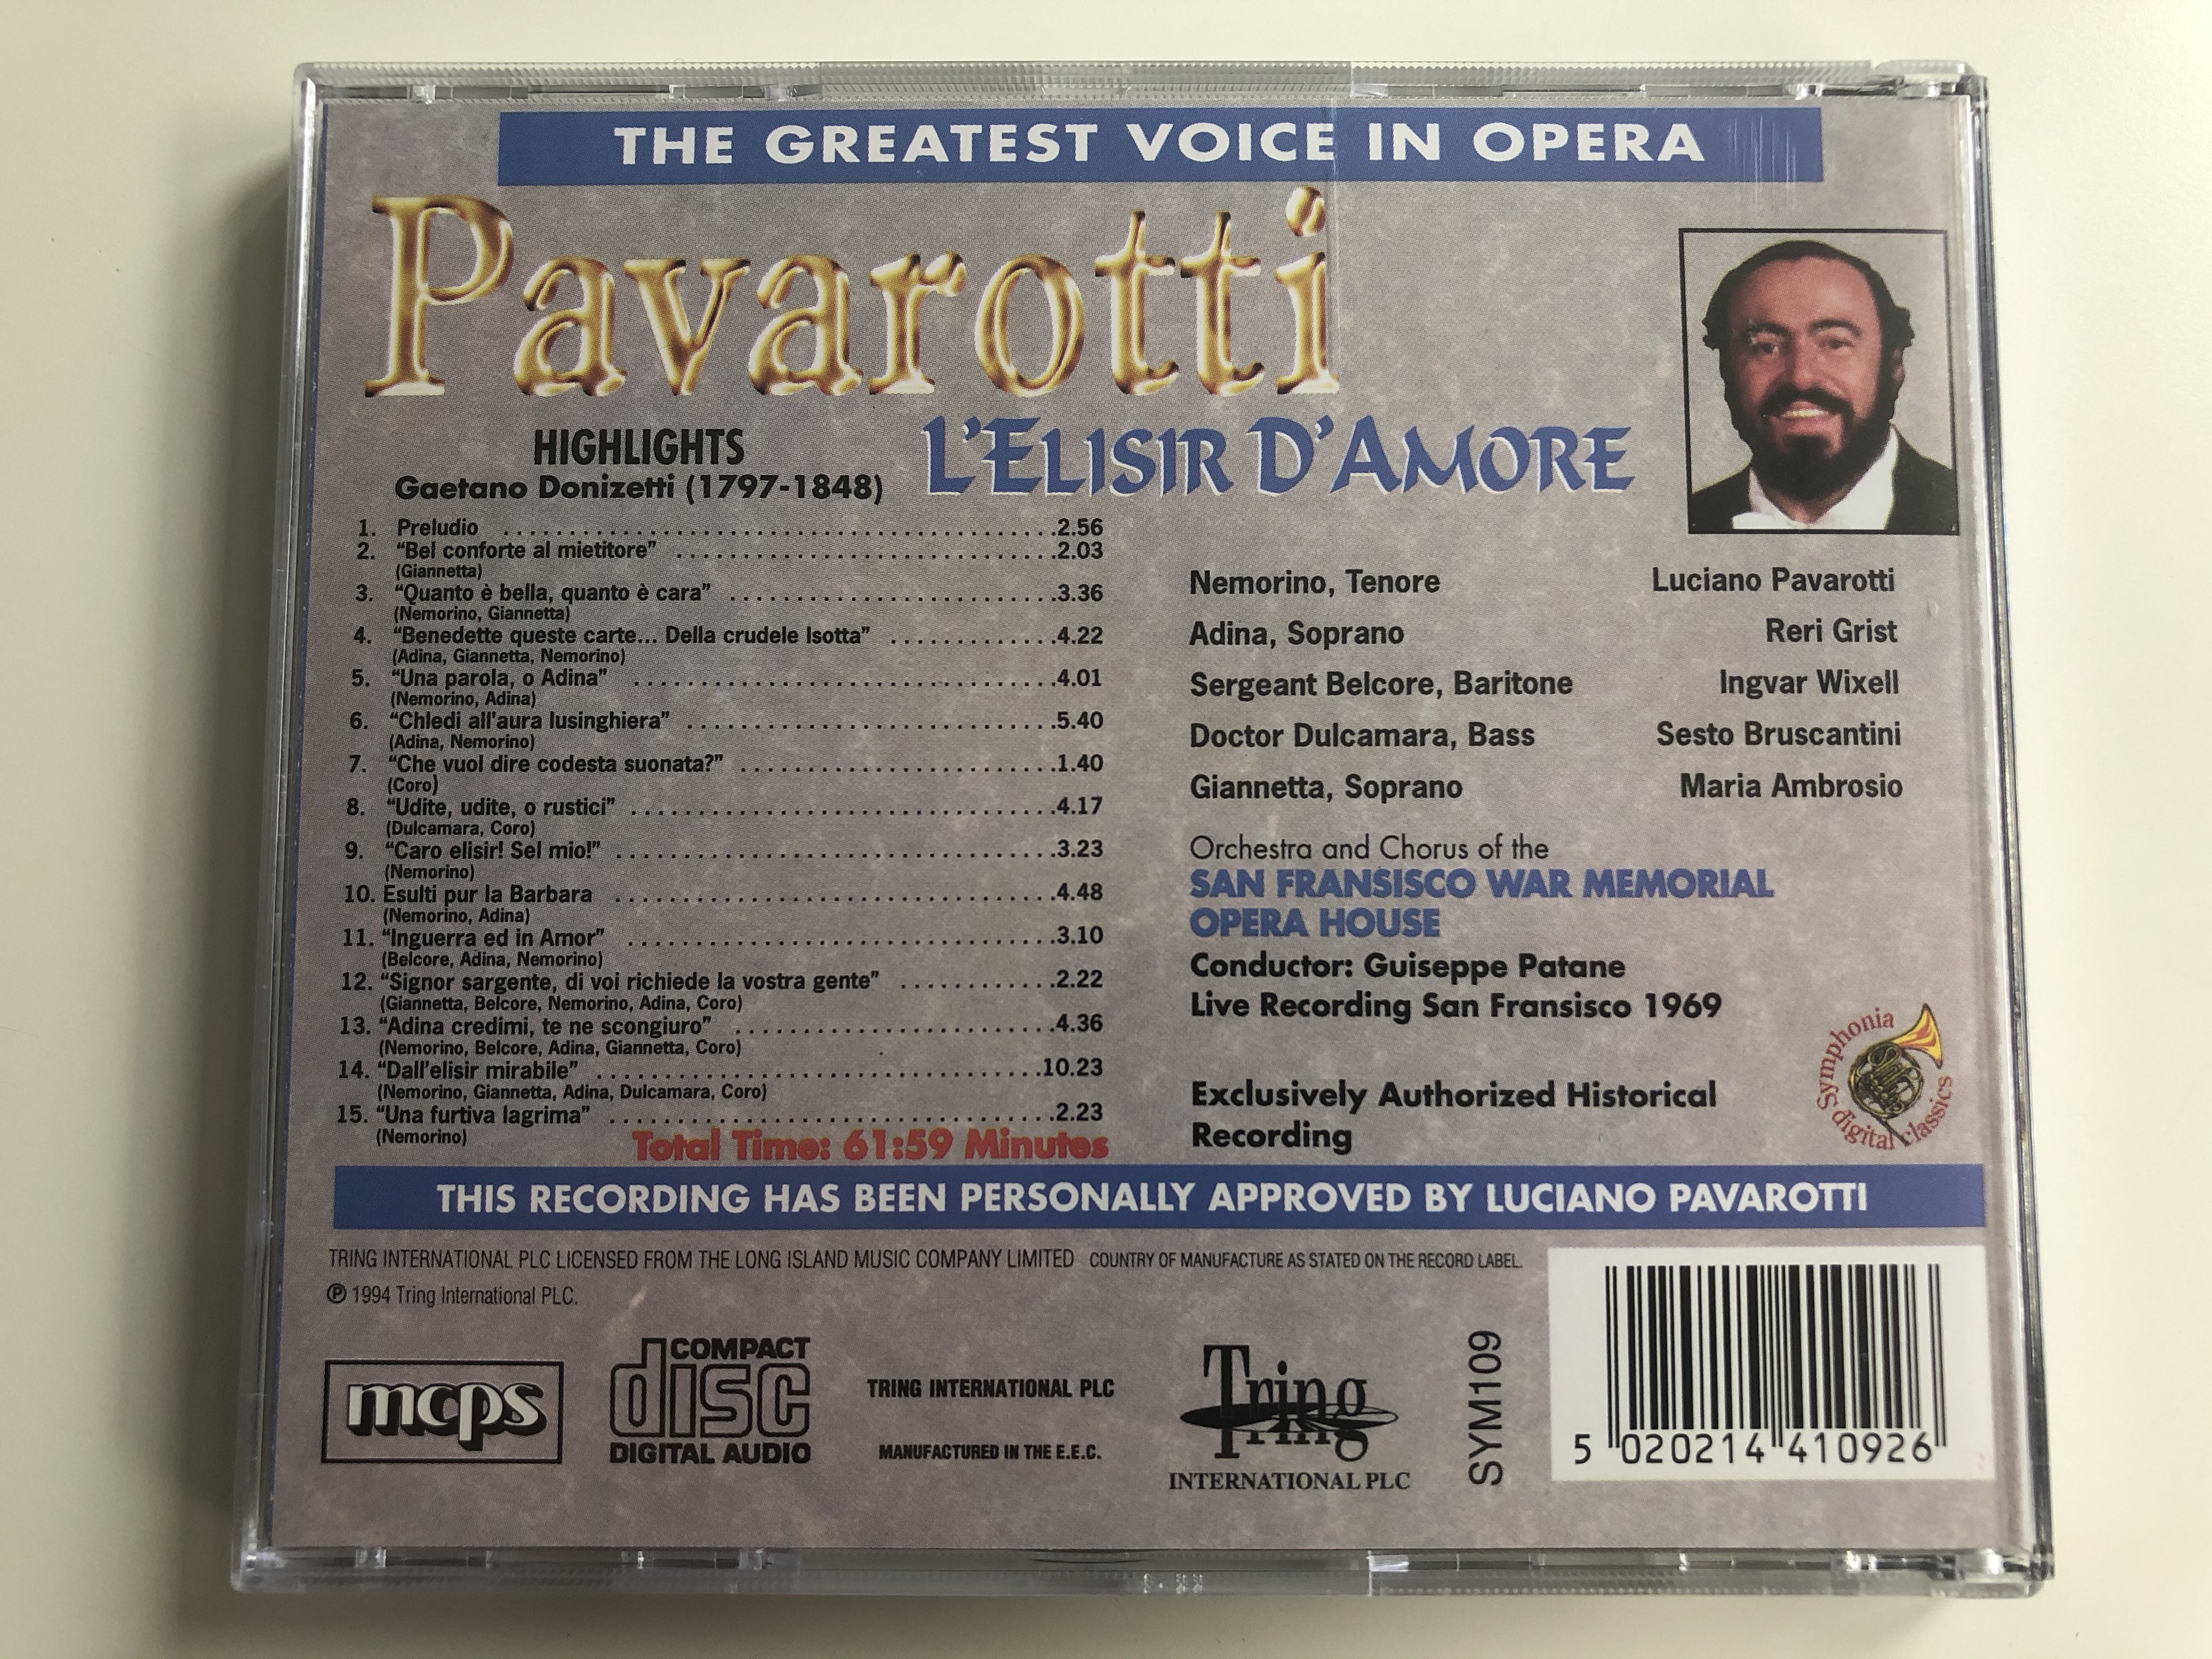 the-greatest-voice-in-opera-pavarotti-l-elisir-d-amore-highlights-orchestra-and-chorus-of-the-san-francisco-war-memorial-opera-house-conductor-guiseppe-patane-featuring-luciano-pavarotti-r-4-.jpg